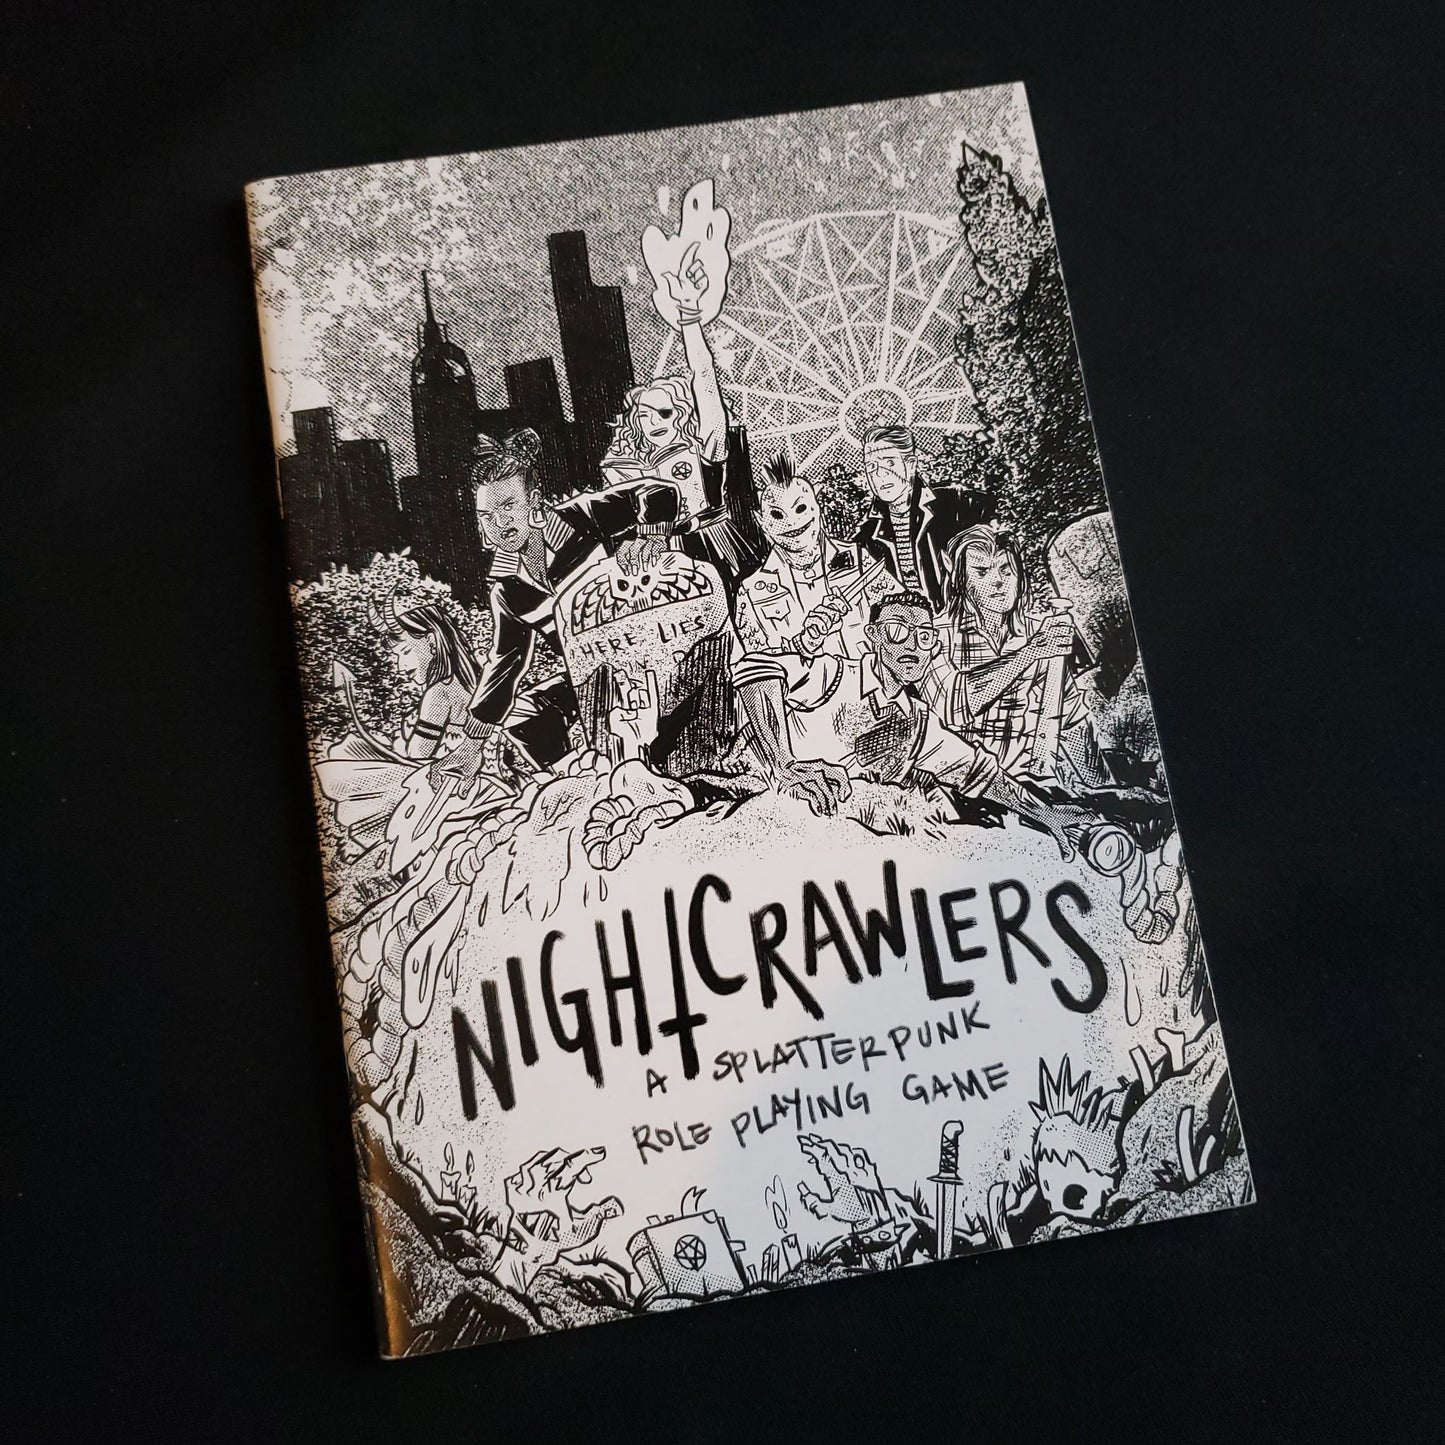 Image shows the front cover of the Nightcrawlers roleplaying game book